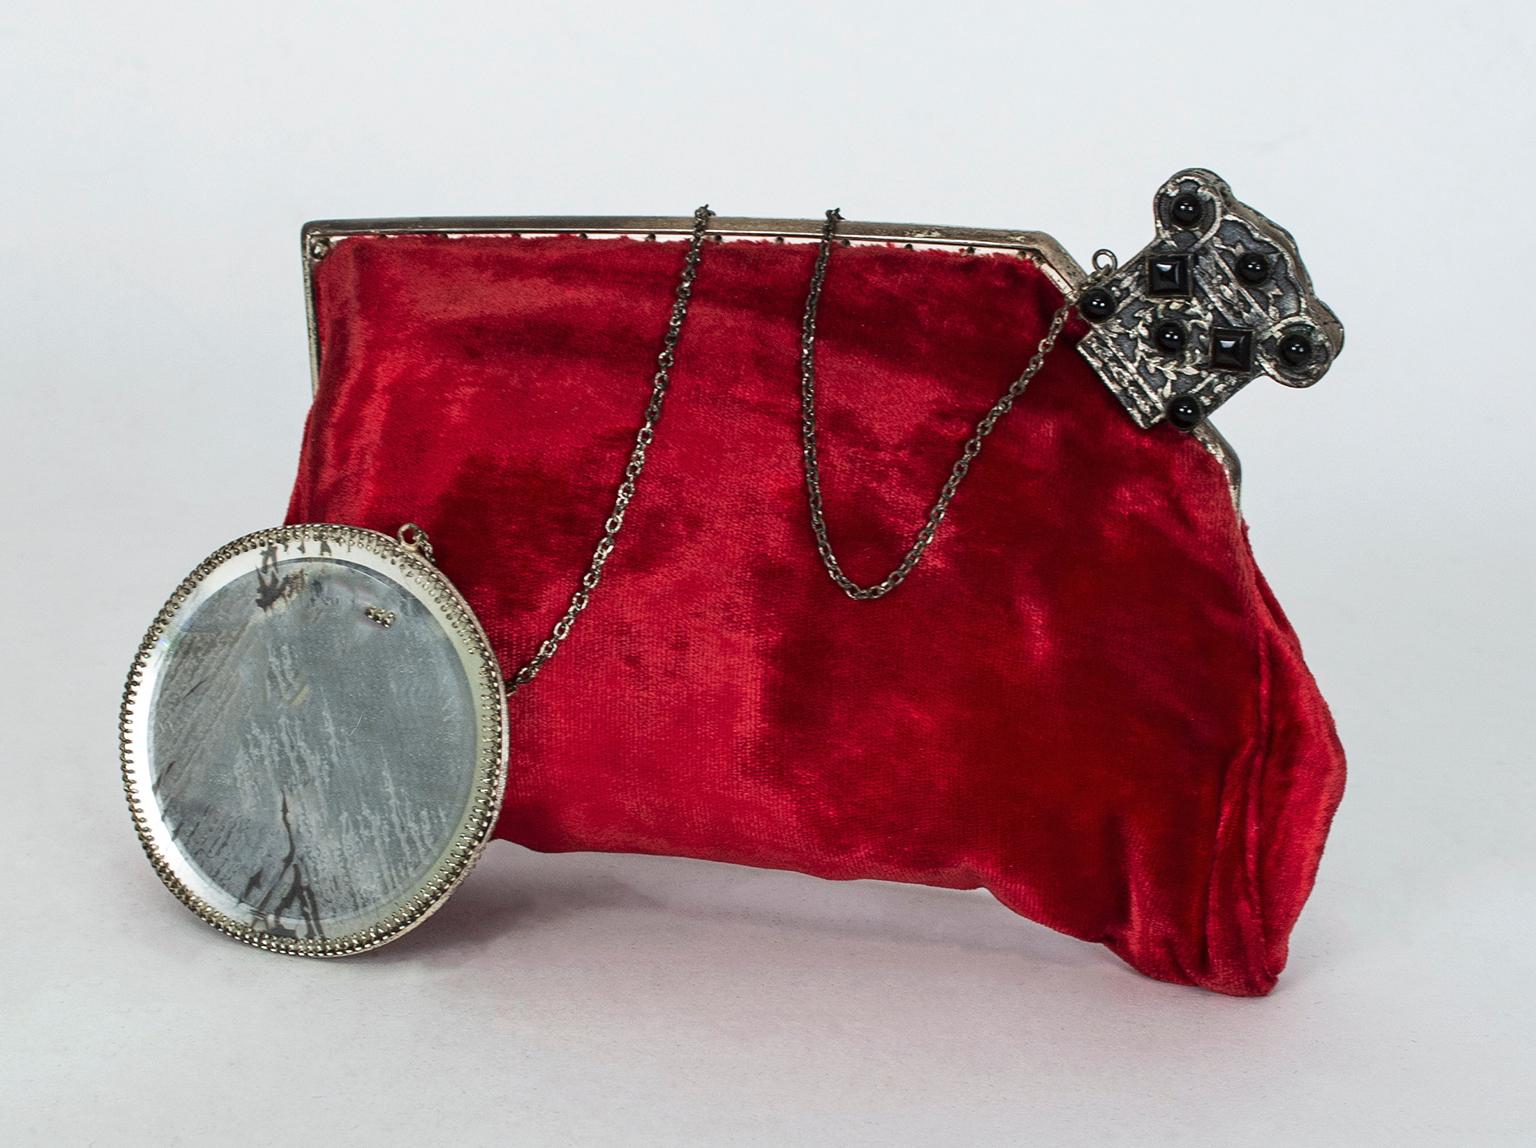 Beyond its luscious blood red color and plush velvet texture, this bag is a head-turner for its unusual polygonal shape and clever closure. The purse has no latch or snap, but instead uses a sprung metal claw--not unlike a hair ornament--to pinch